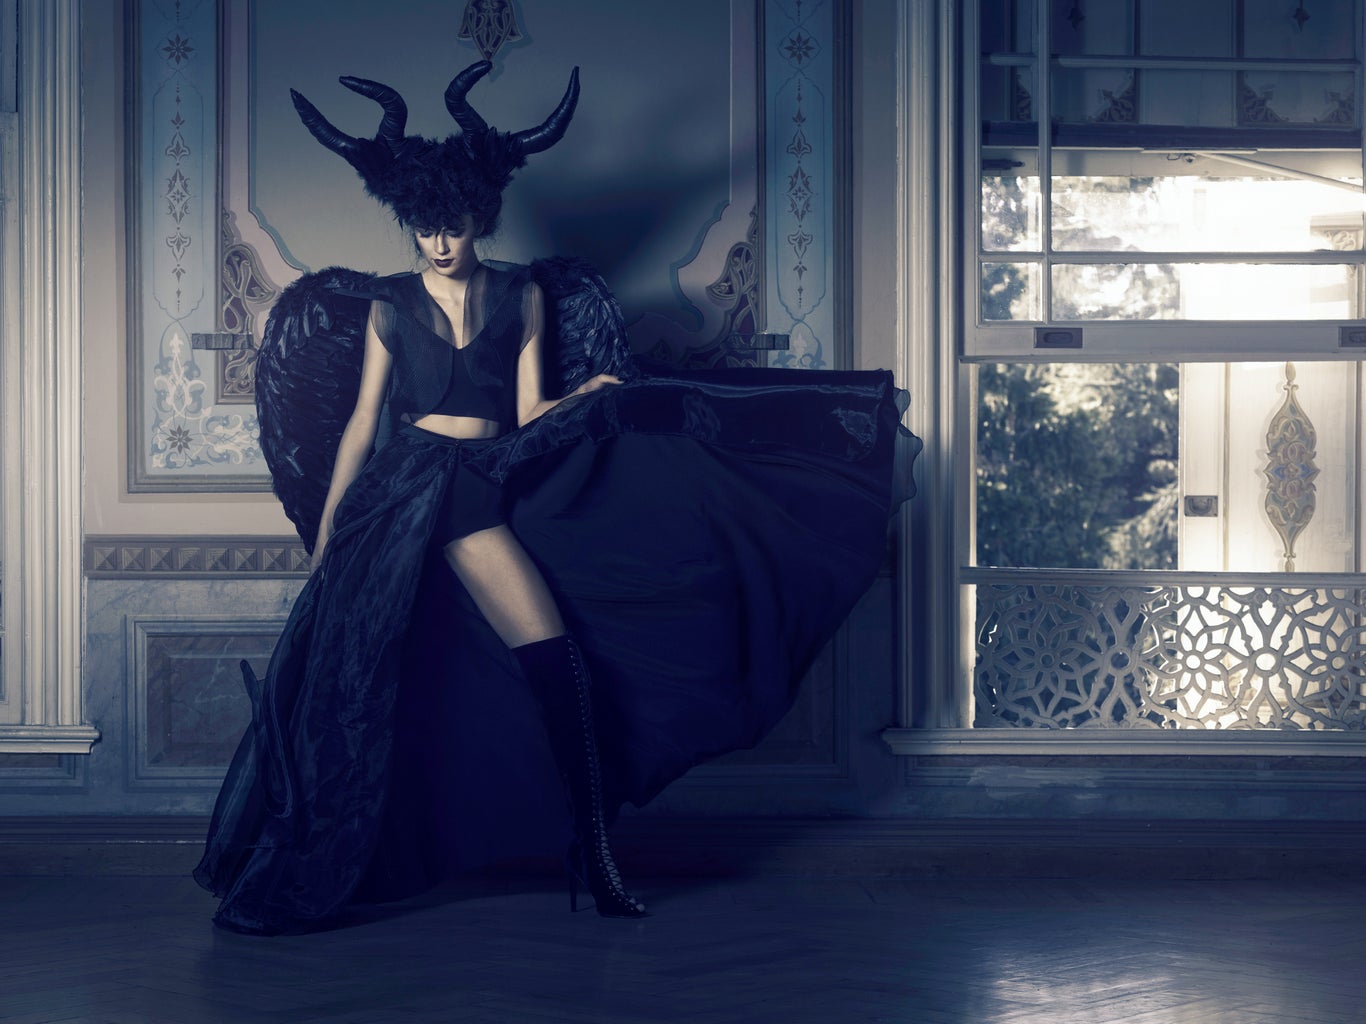 woman in black outfit with horns posing near window